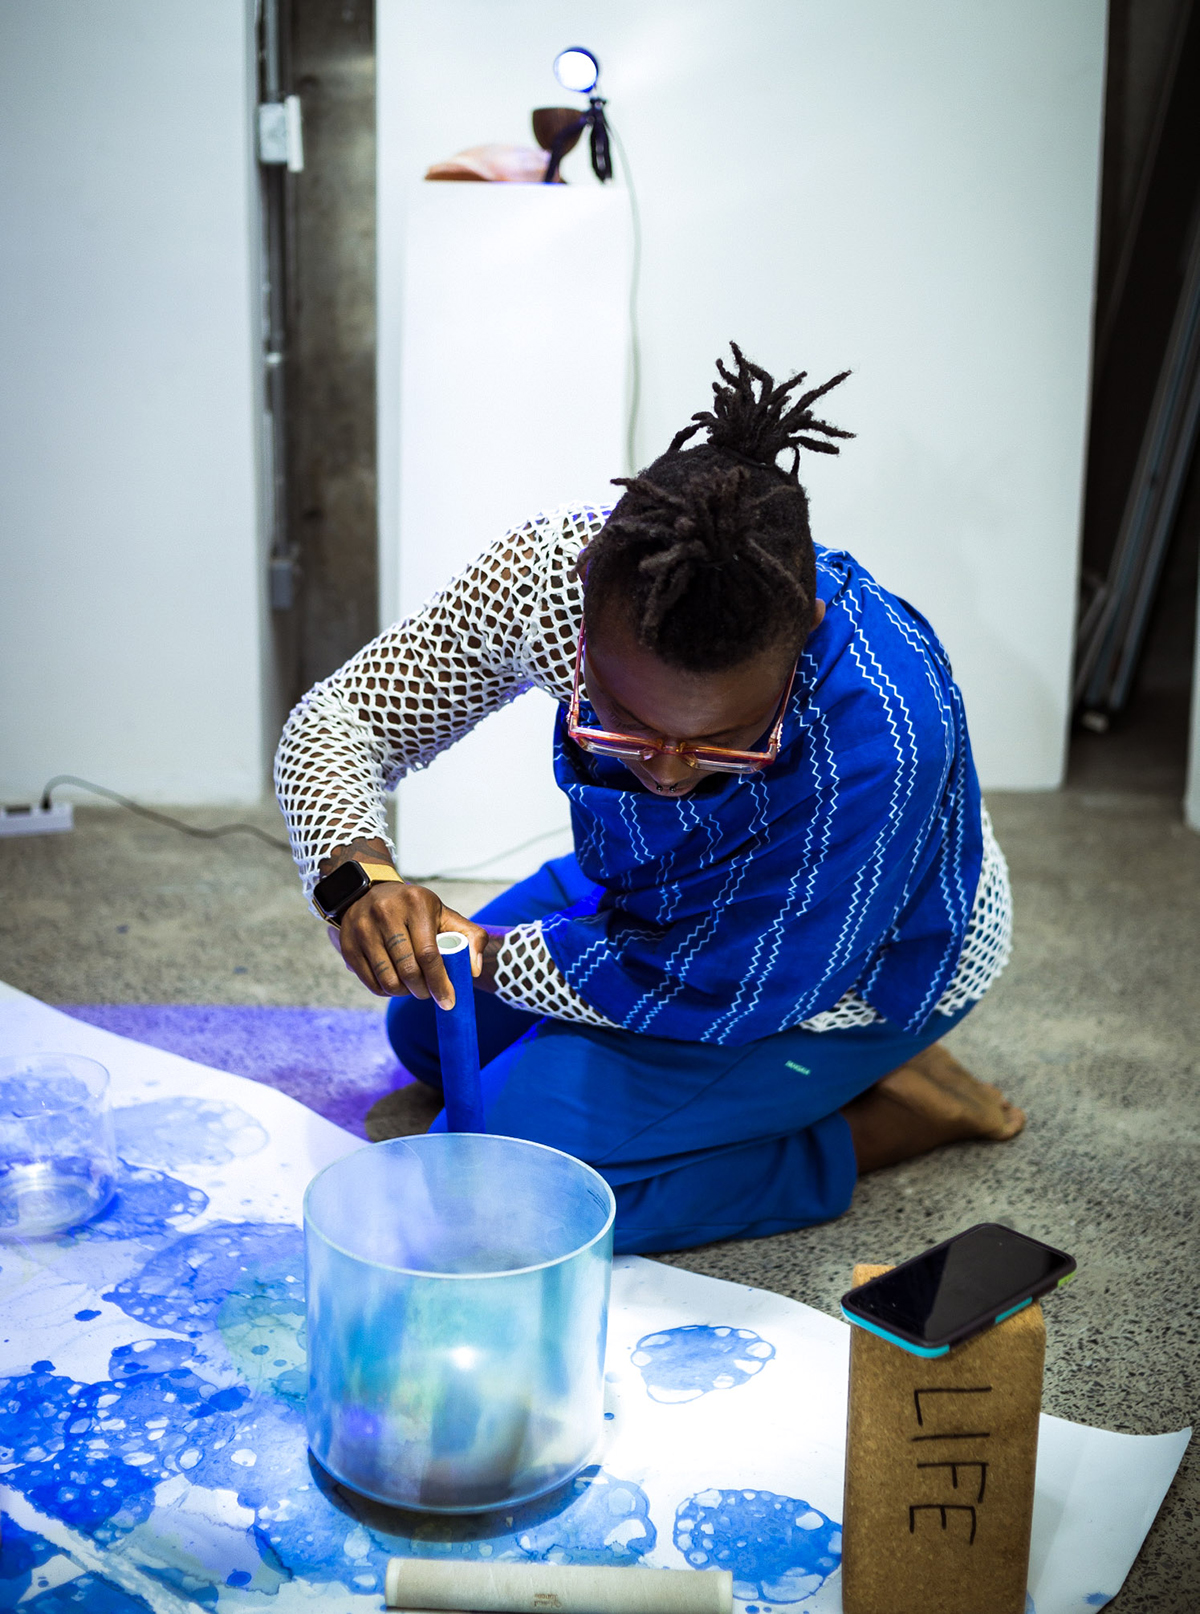 A woman wearing a white and blue top painting on the floor with blue paint 